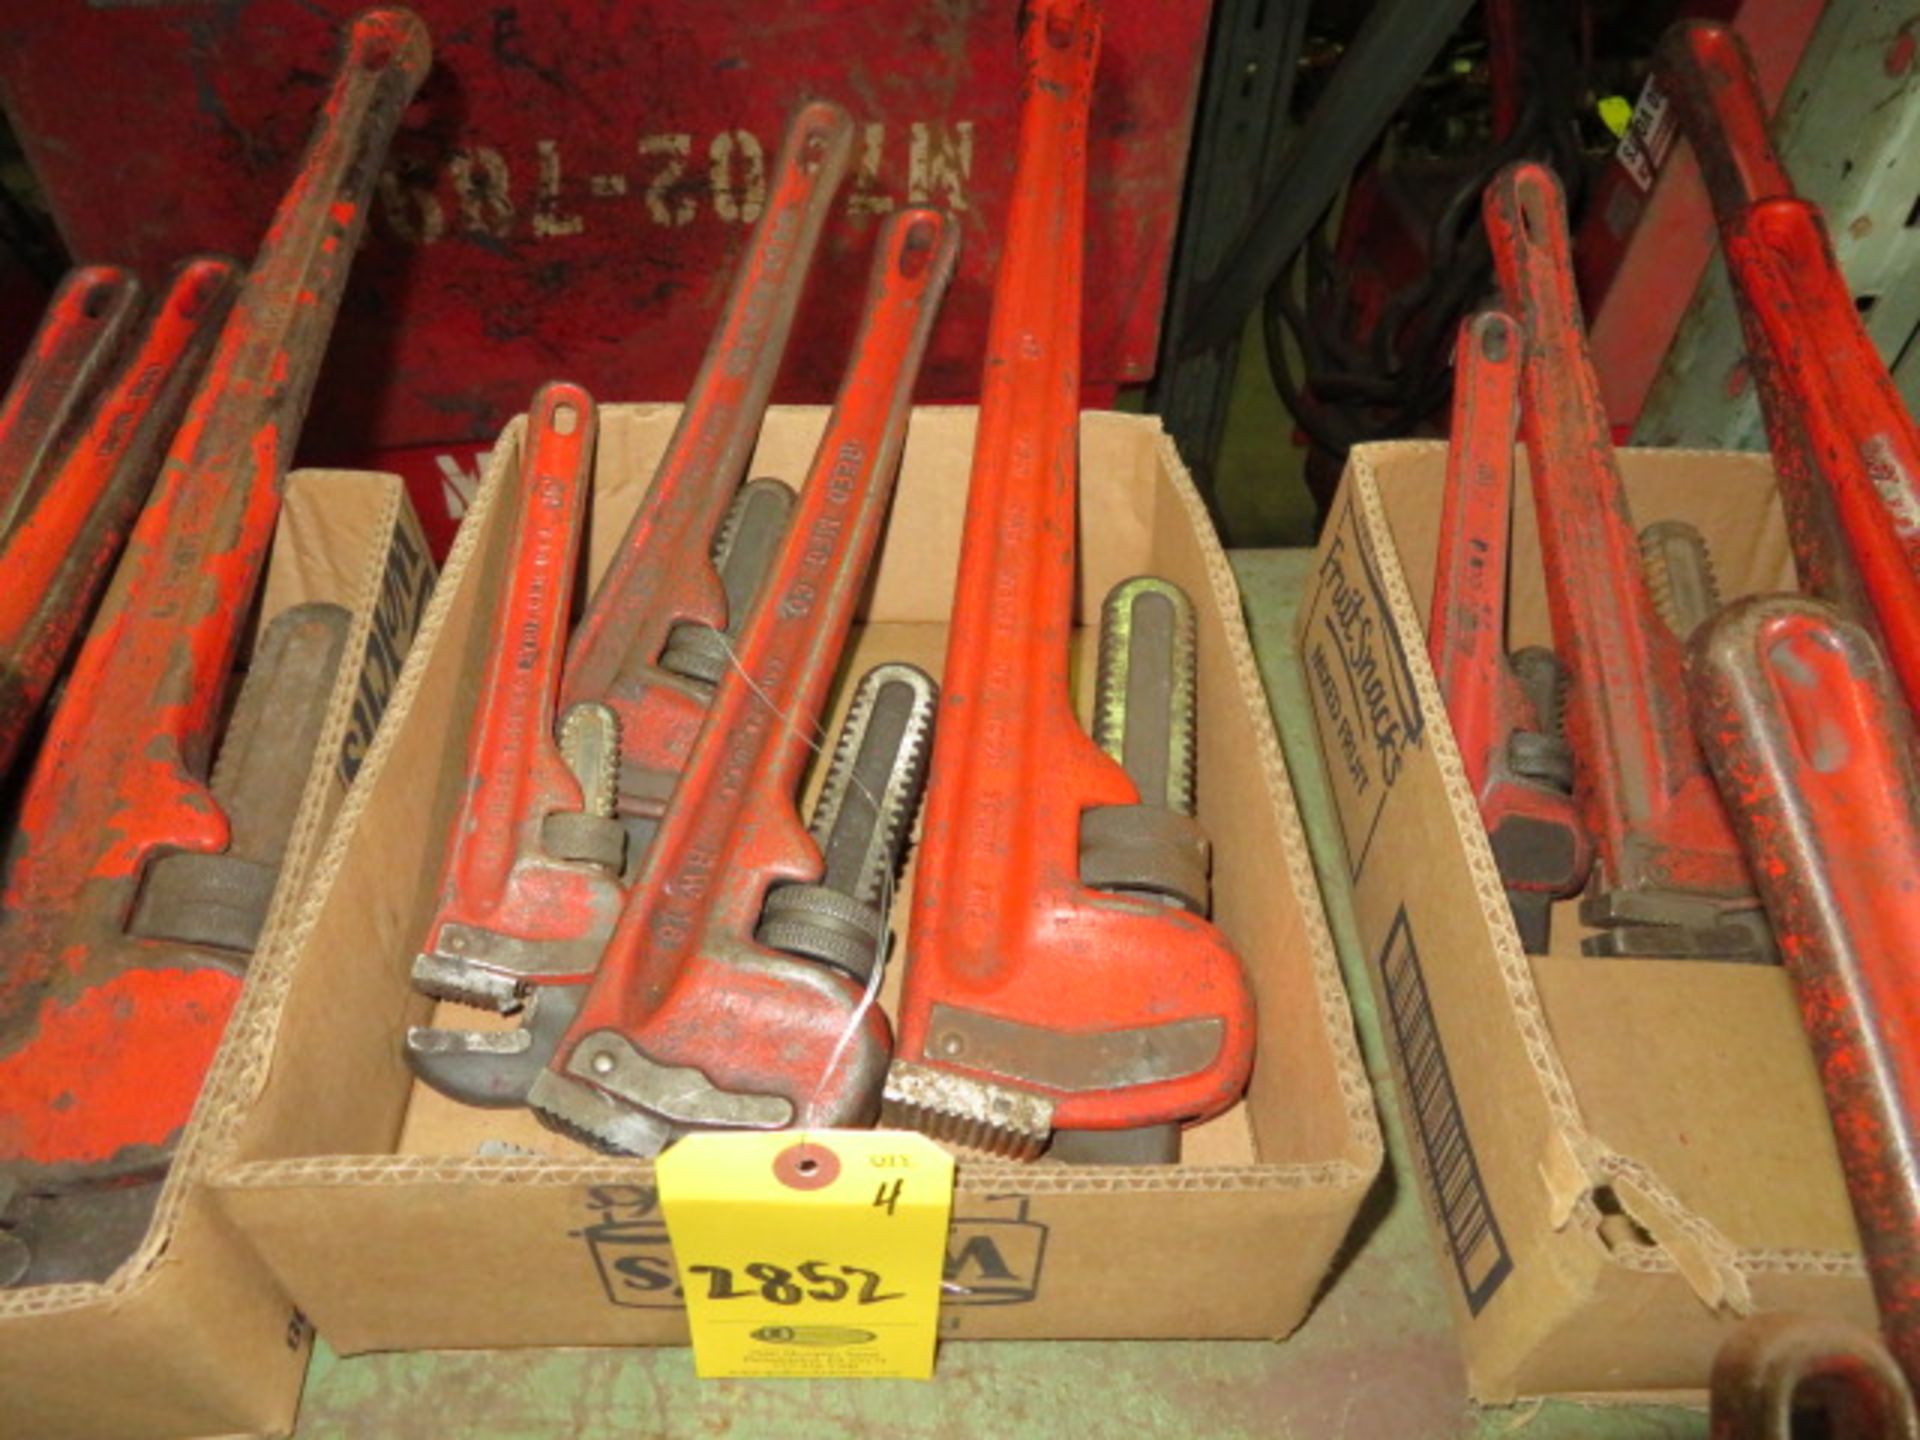 4- RIGID STEEL PIPE WRENCHES, 10" - 24"